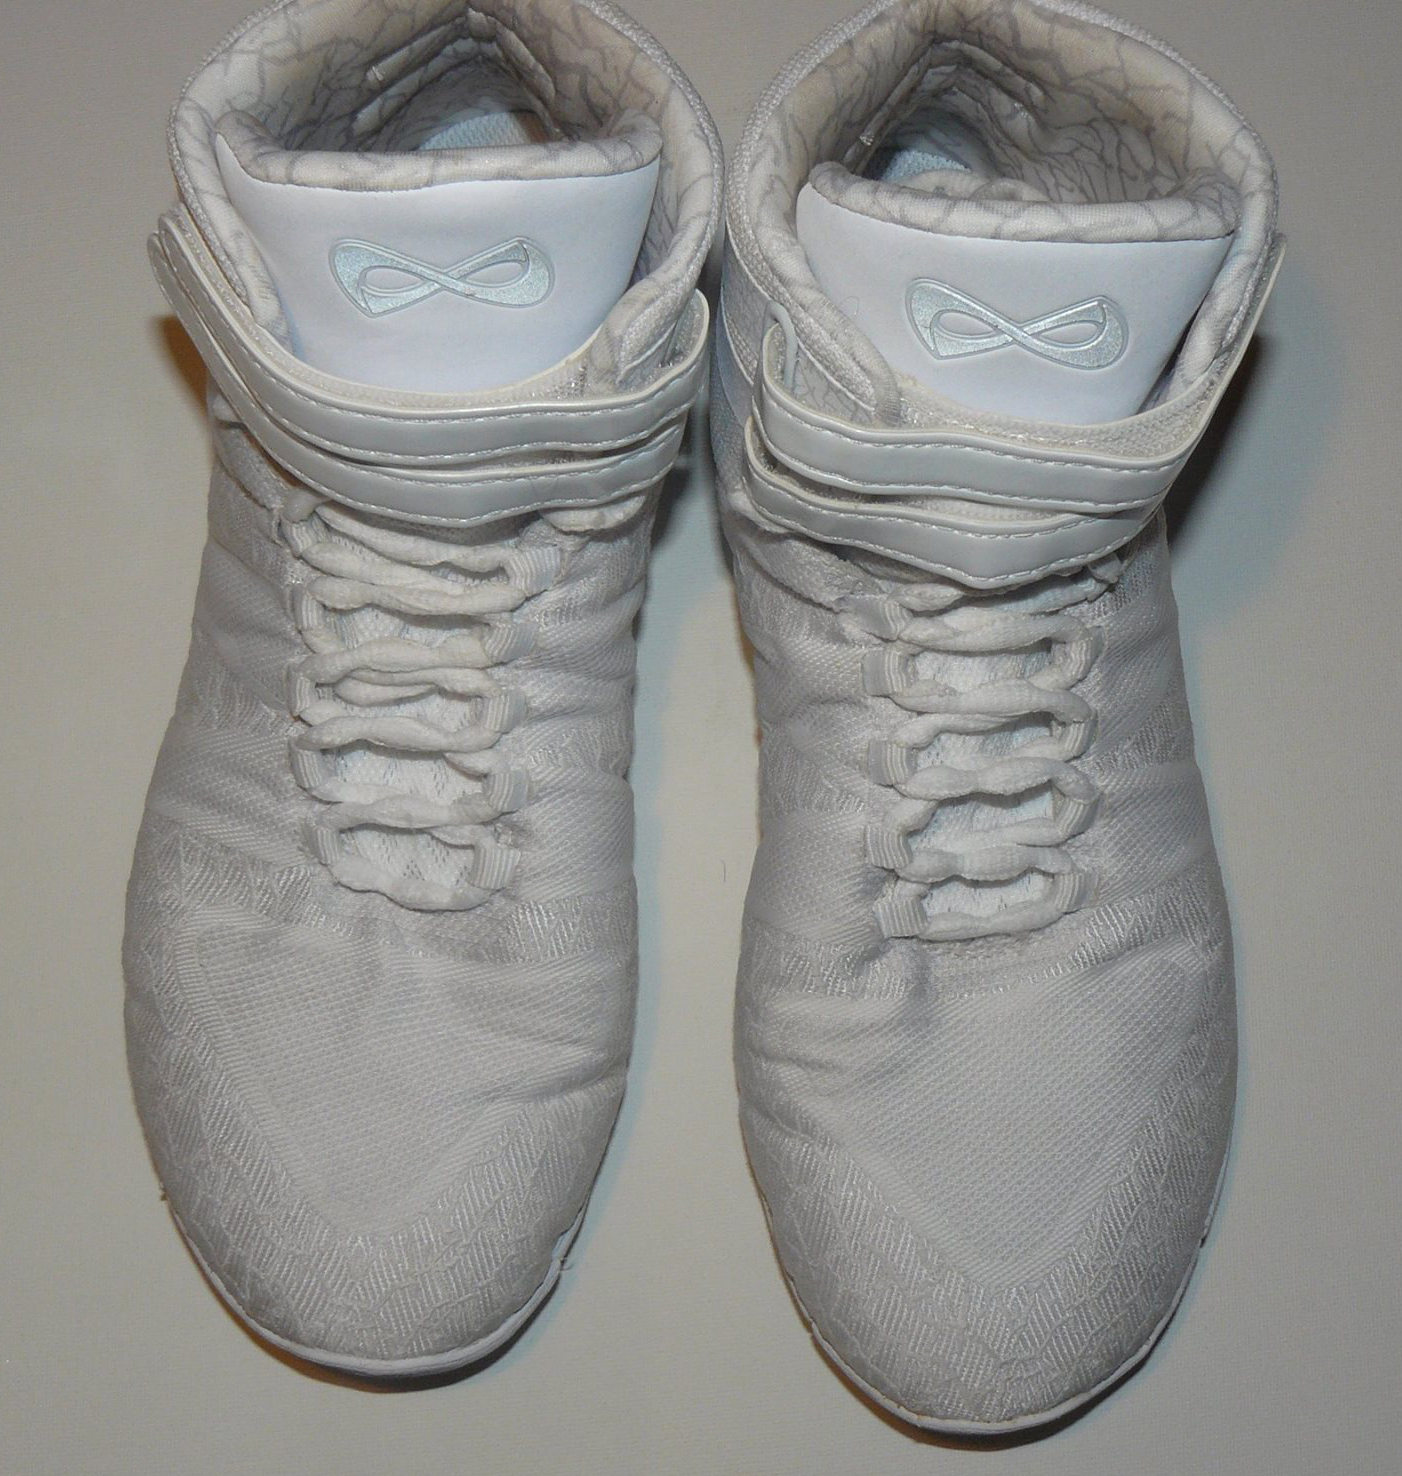 nfinity flyer cheer shoes